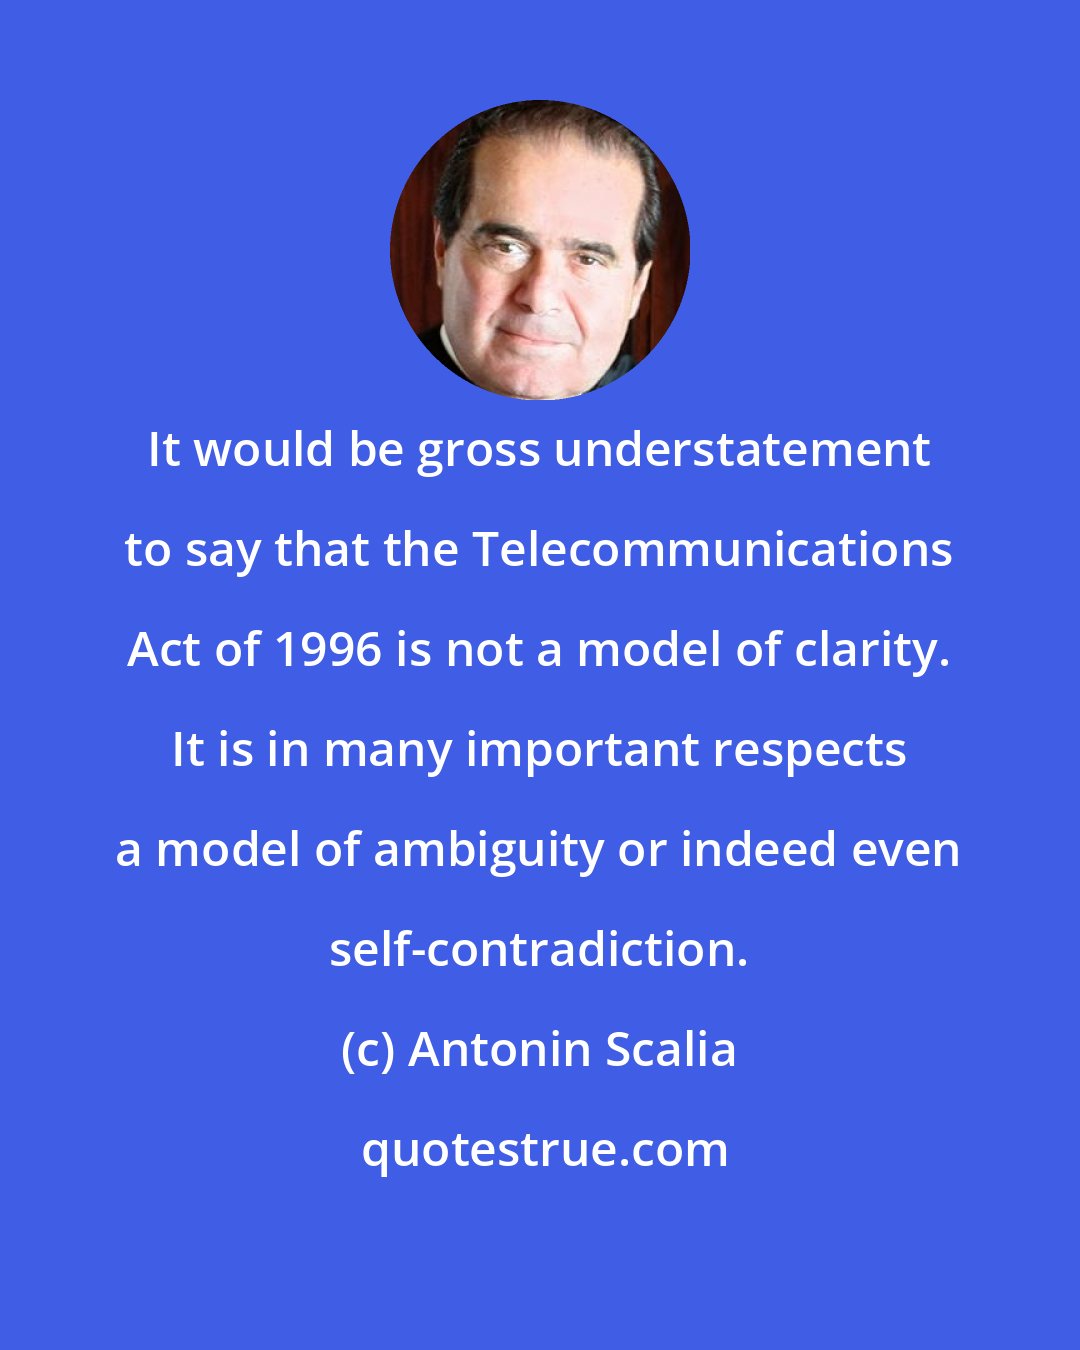 Antonin Scalia: It would be gross understatement to say that the Telecommunications Act of 1996 is not a model of clarity. It is in many important respects a model of ambiguity or indeed even self-contradiction.